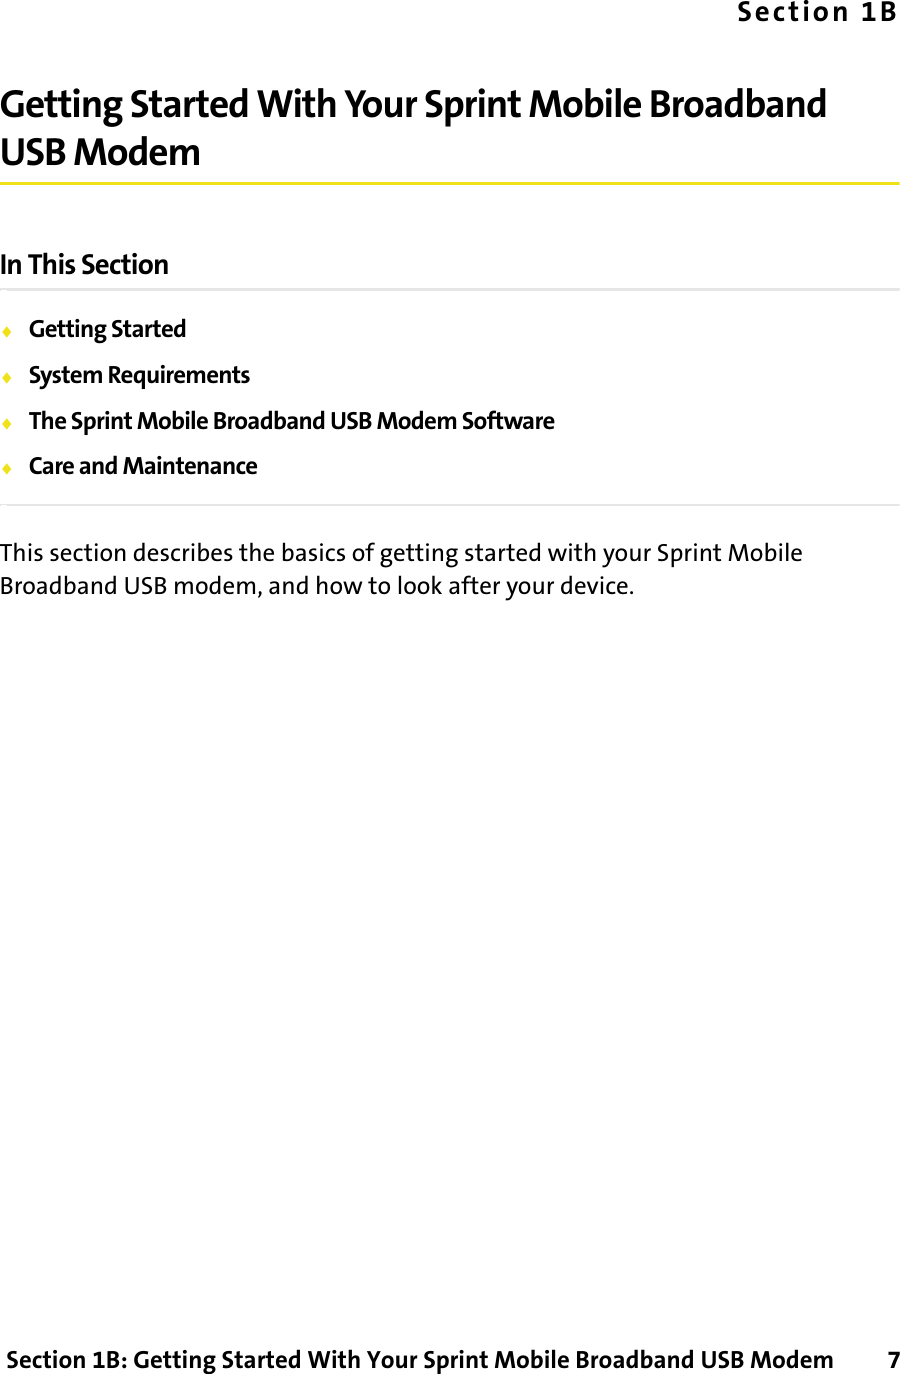  Section 1B: Getting Started With Your Sprint Mobile Broadband USB Modem      7Section 1BGetting Started With Your Sprint Mobile Broadband USB ModemIn This Section⽧Getting Started⽧System Requirements⽧The Sprint Mobile Broadband USB Modem Software⽧Care and MaintenanceThis section describes the basics of getting started with your Sprint Mobile Broadband USB modem, and how to look after your device.